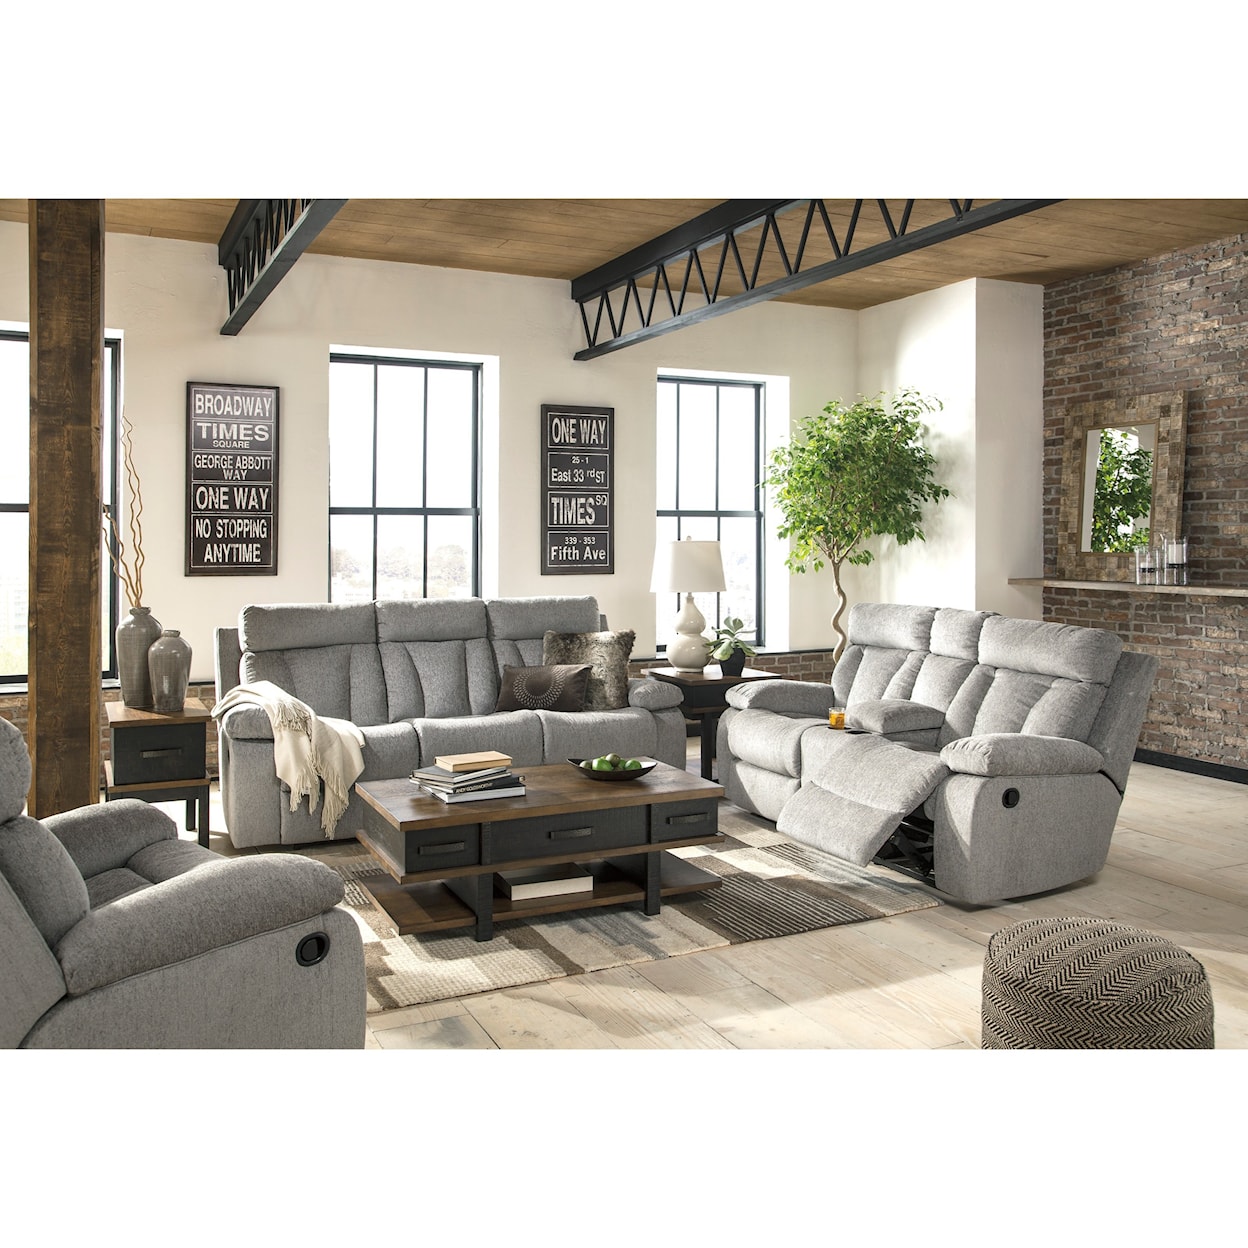 Signature Design by Ashley Furniture Mitchiner Reclining Living Room Group